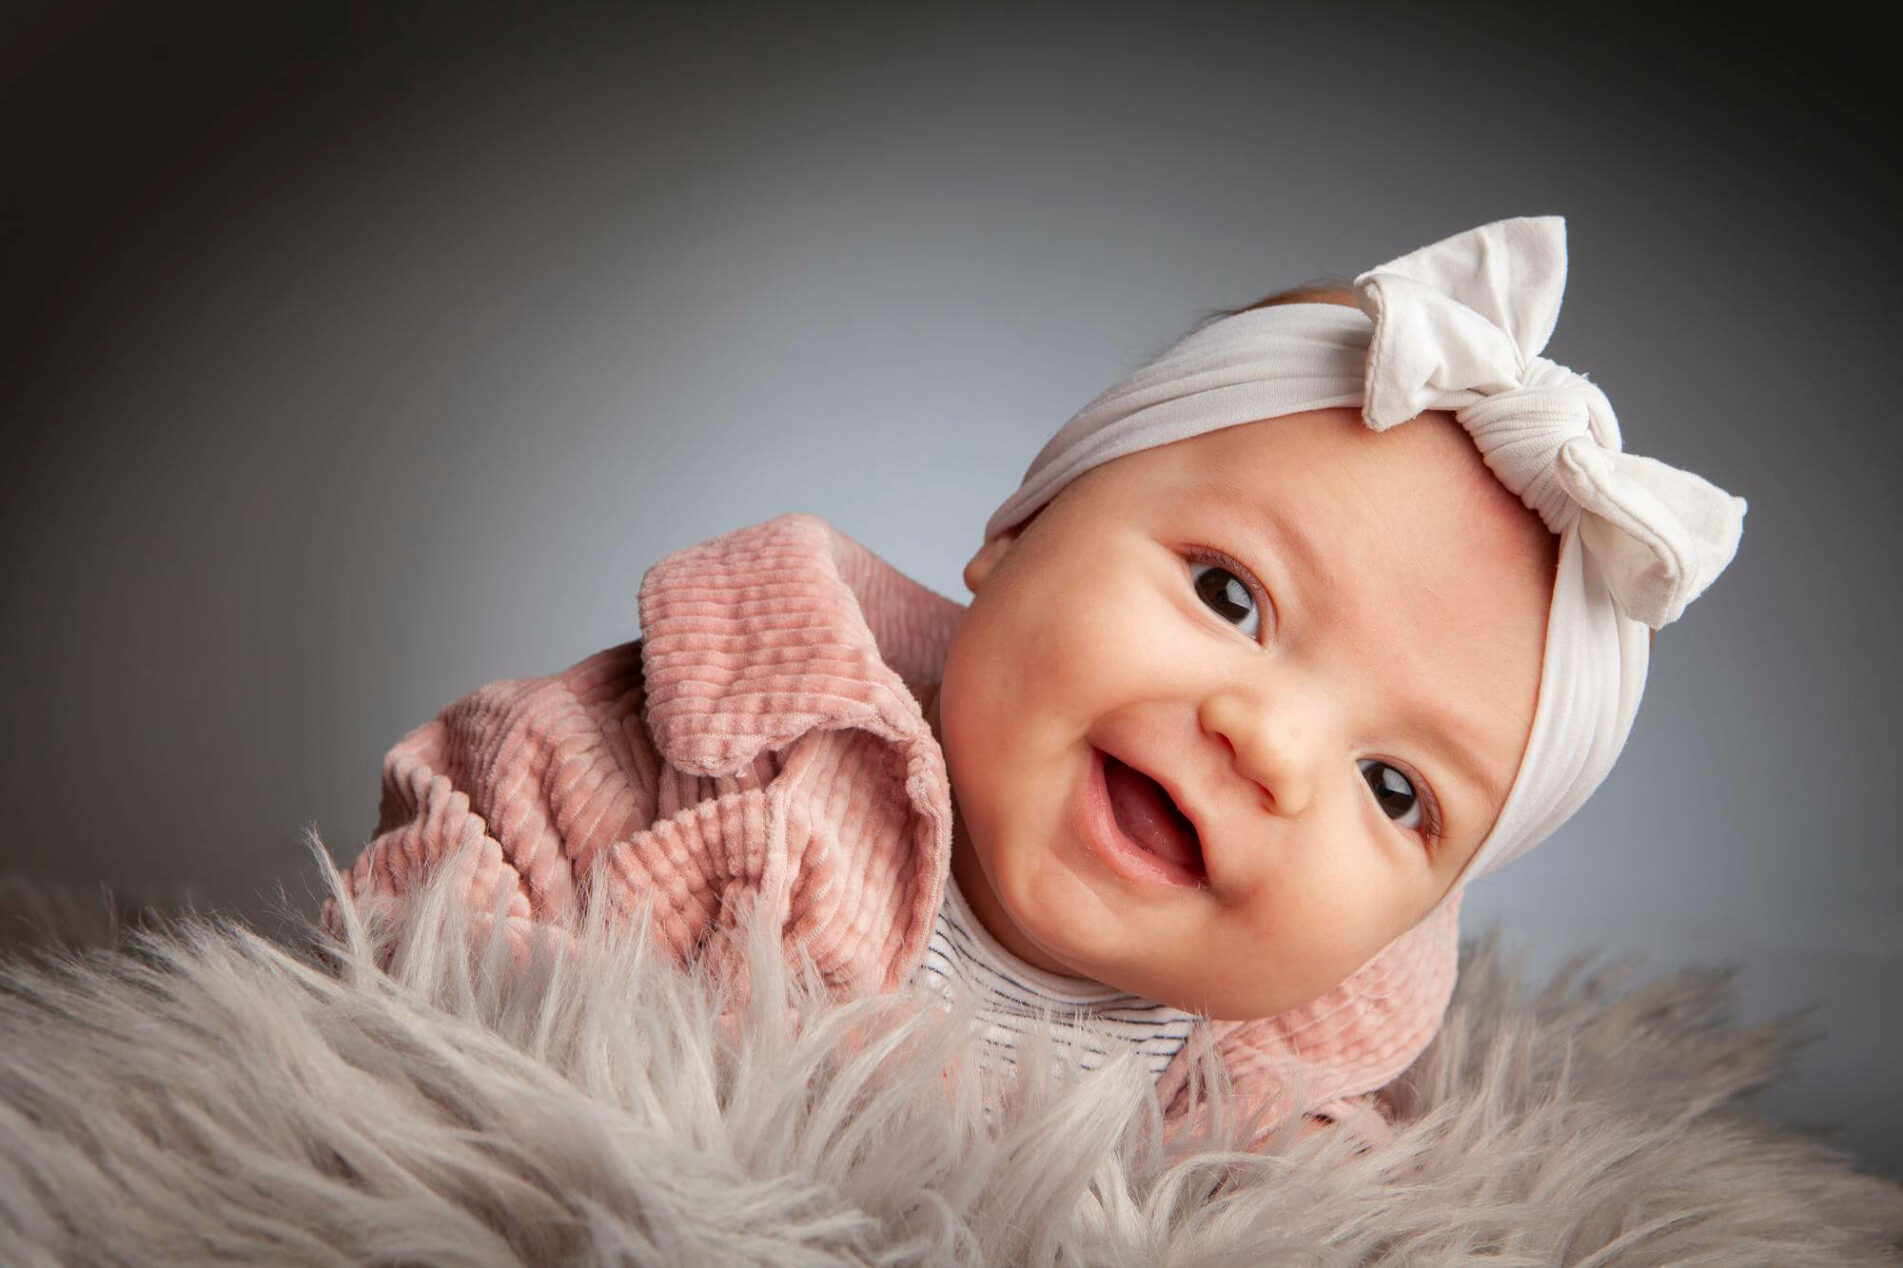 smiling baby girl with white headband